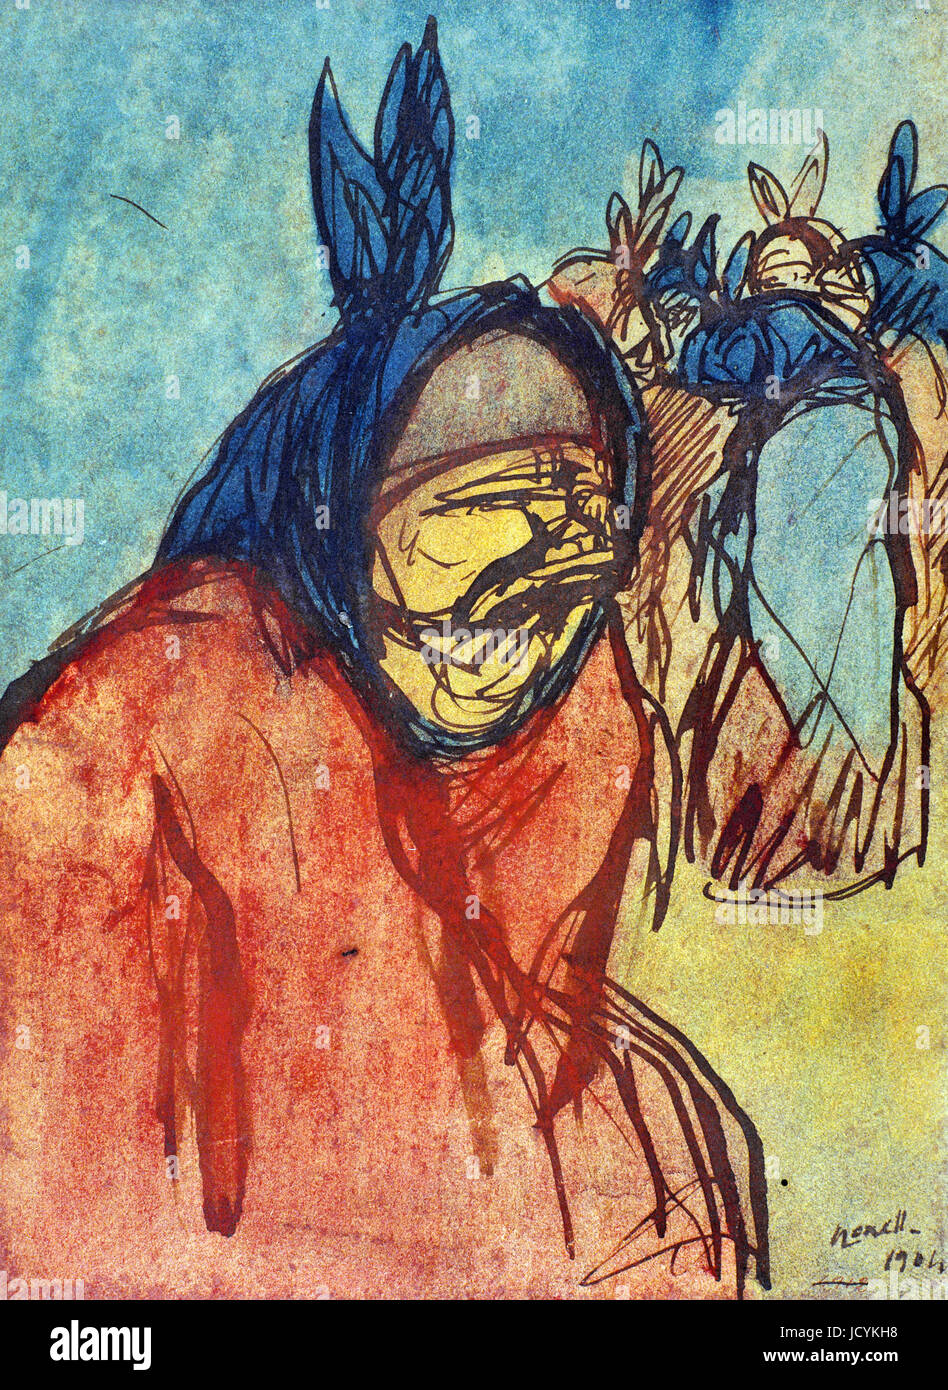 Isidre Nonell, Group of Cretins in Boi 1904 Drawing, pencil and watercolor on paper. Museu Nacional d'Art de Catalunya, Barcelona, Spai Stock Photo